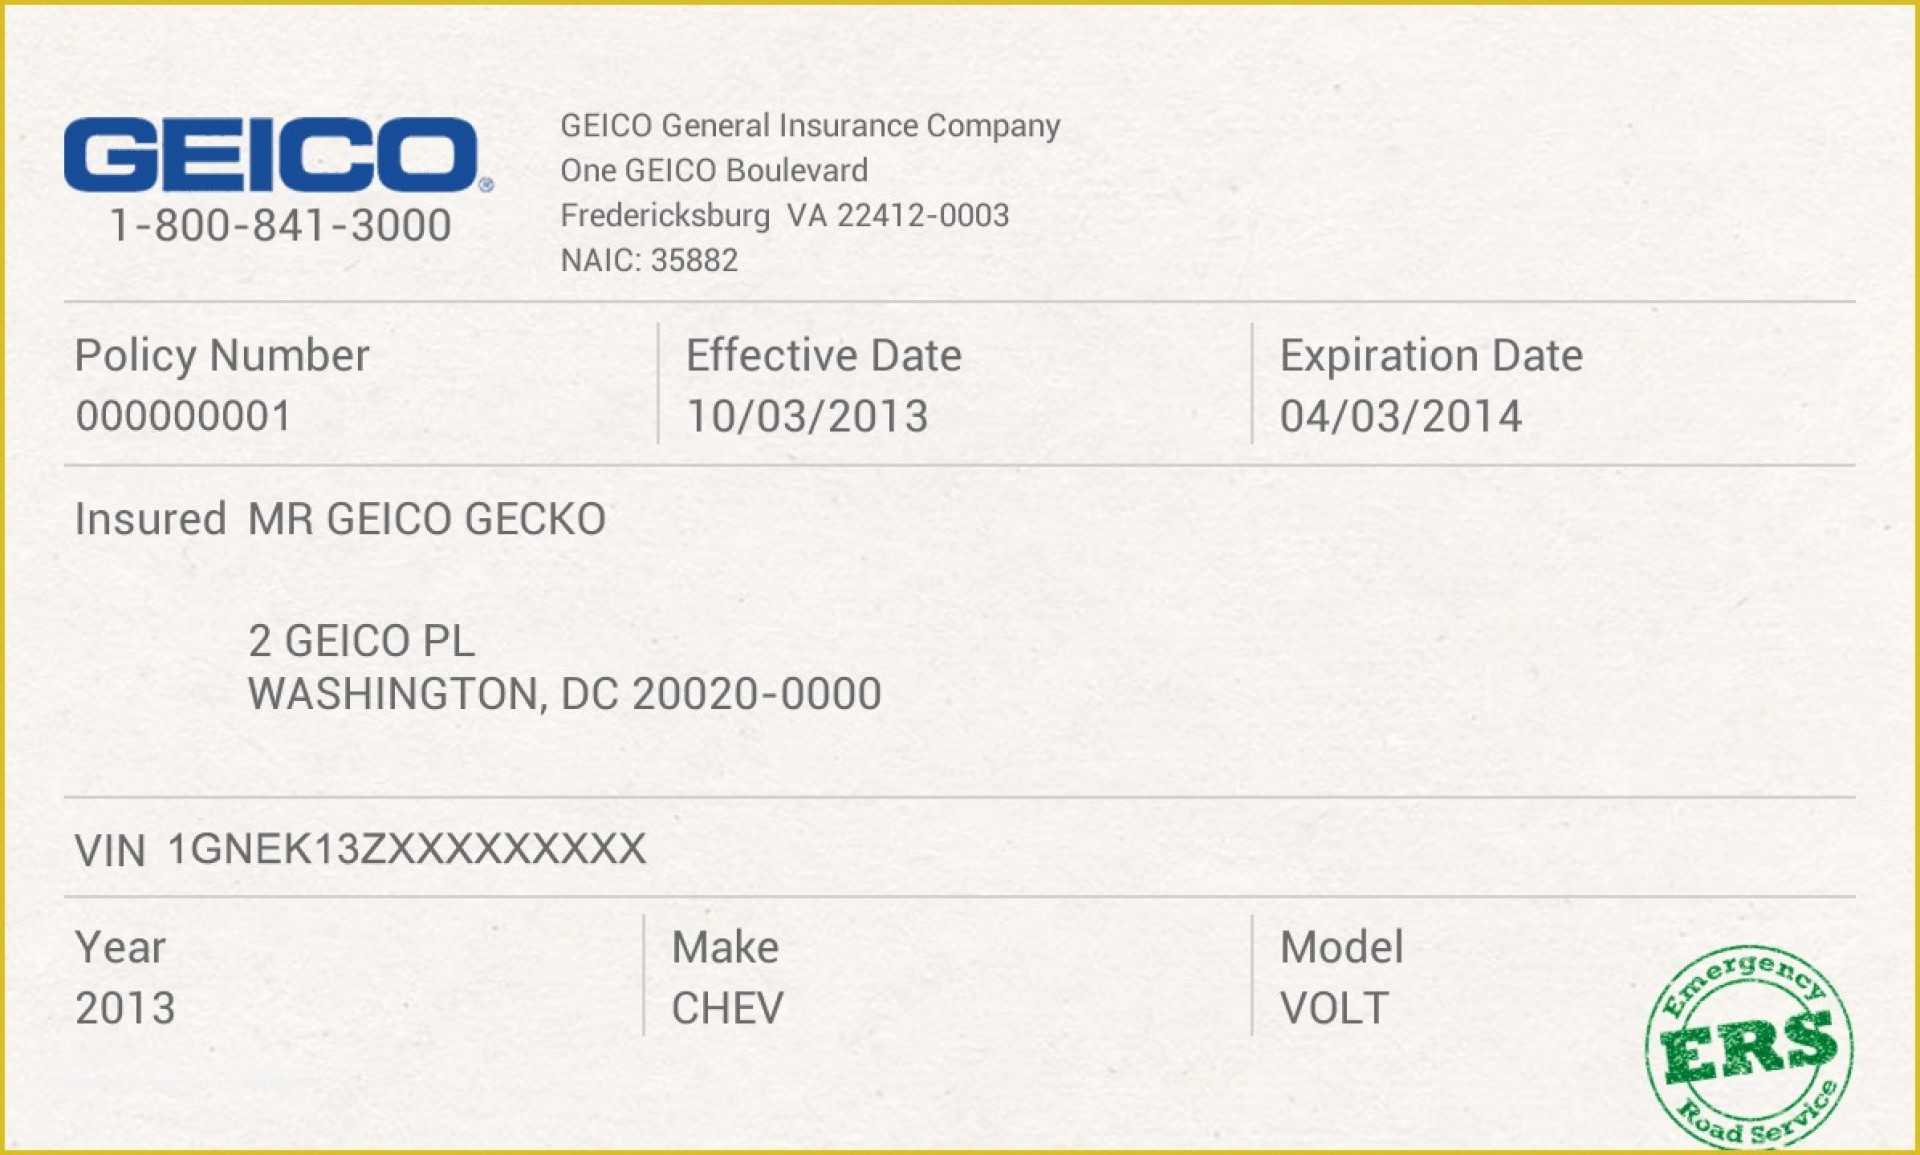 012 Company Car Policy Template Free Auto Insurance Id Card Throughout Auto Insurance Card Template Free Download